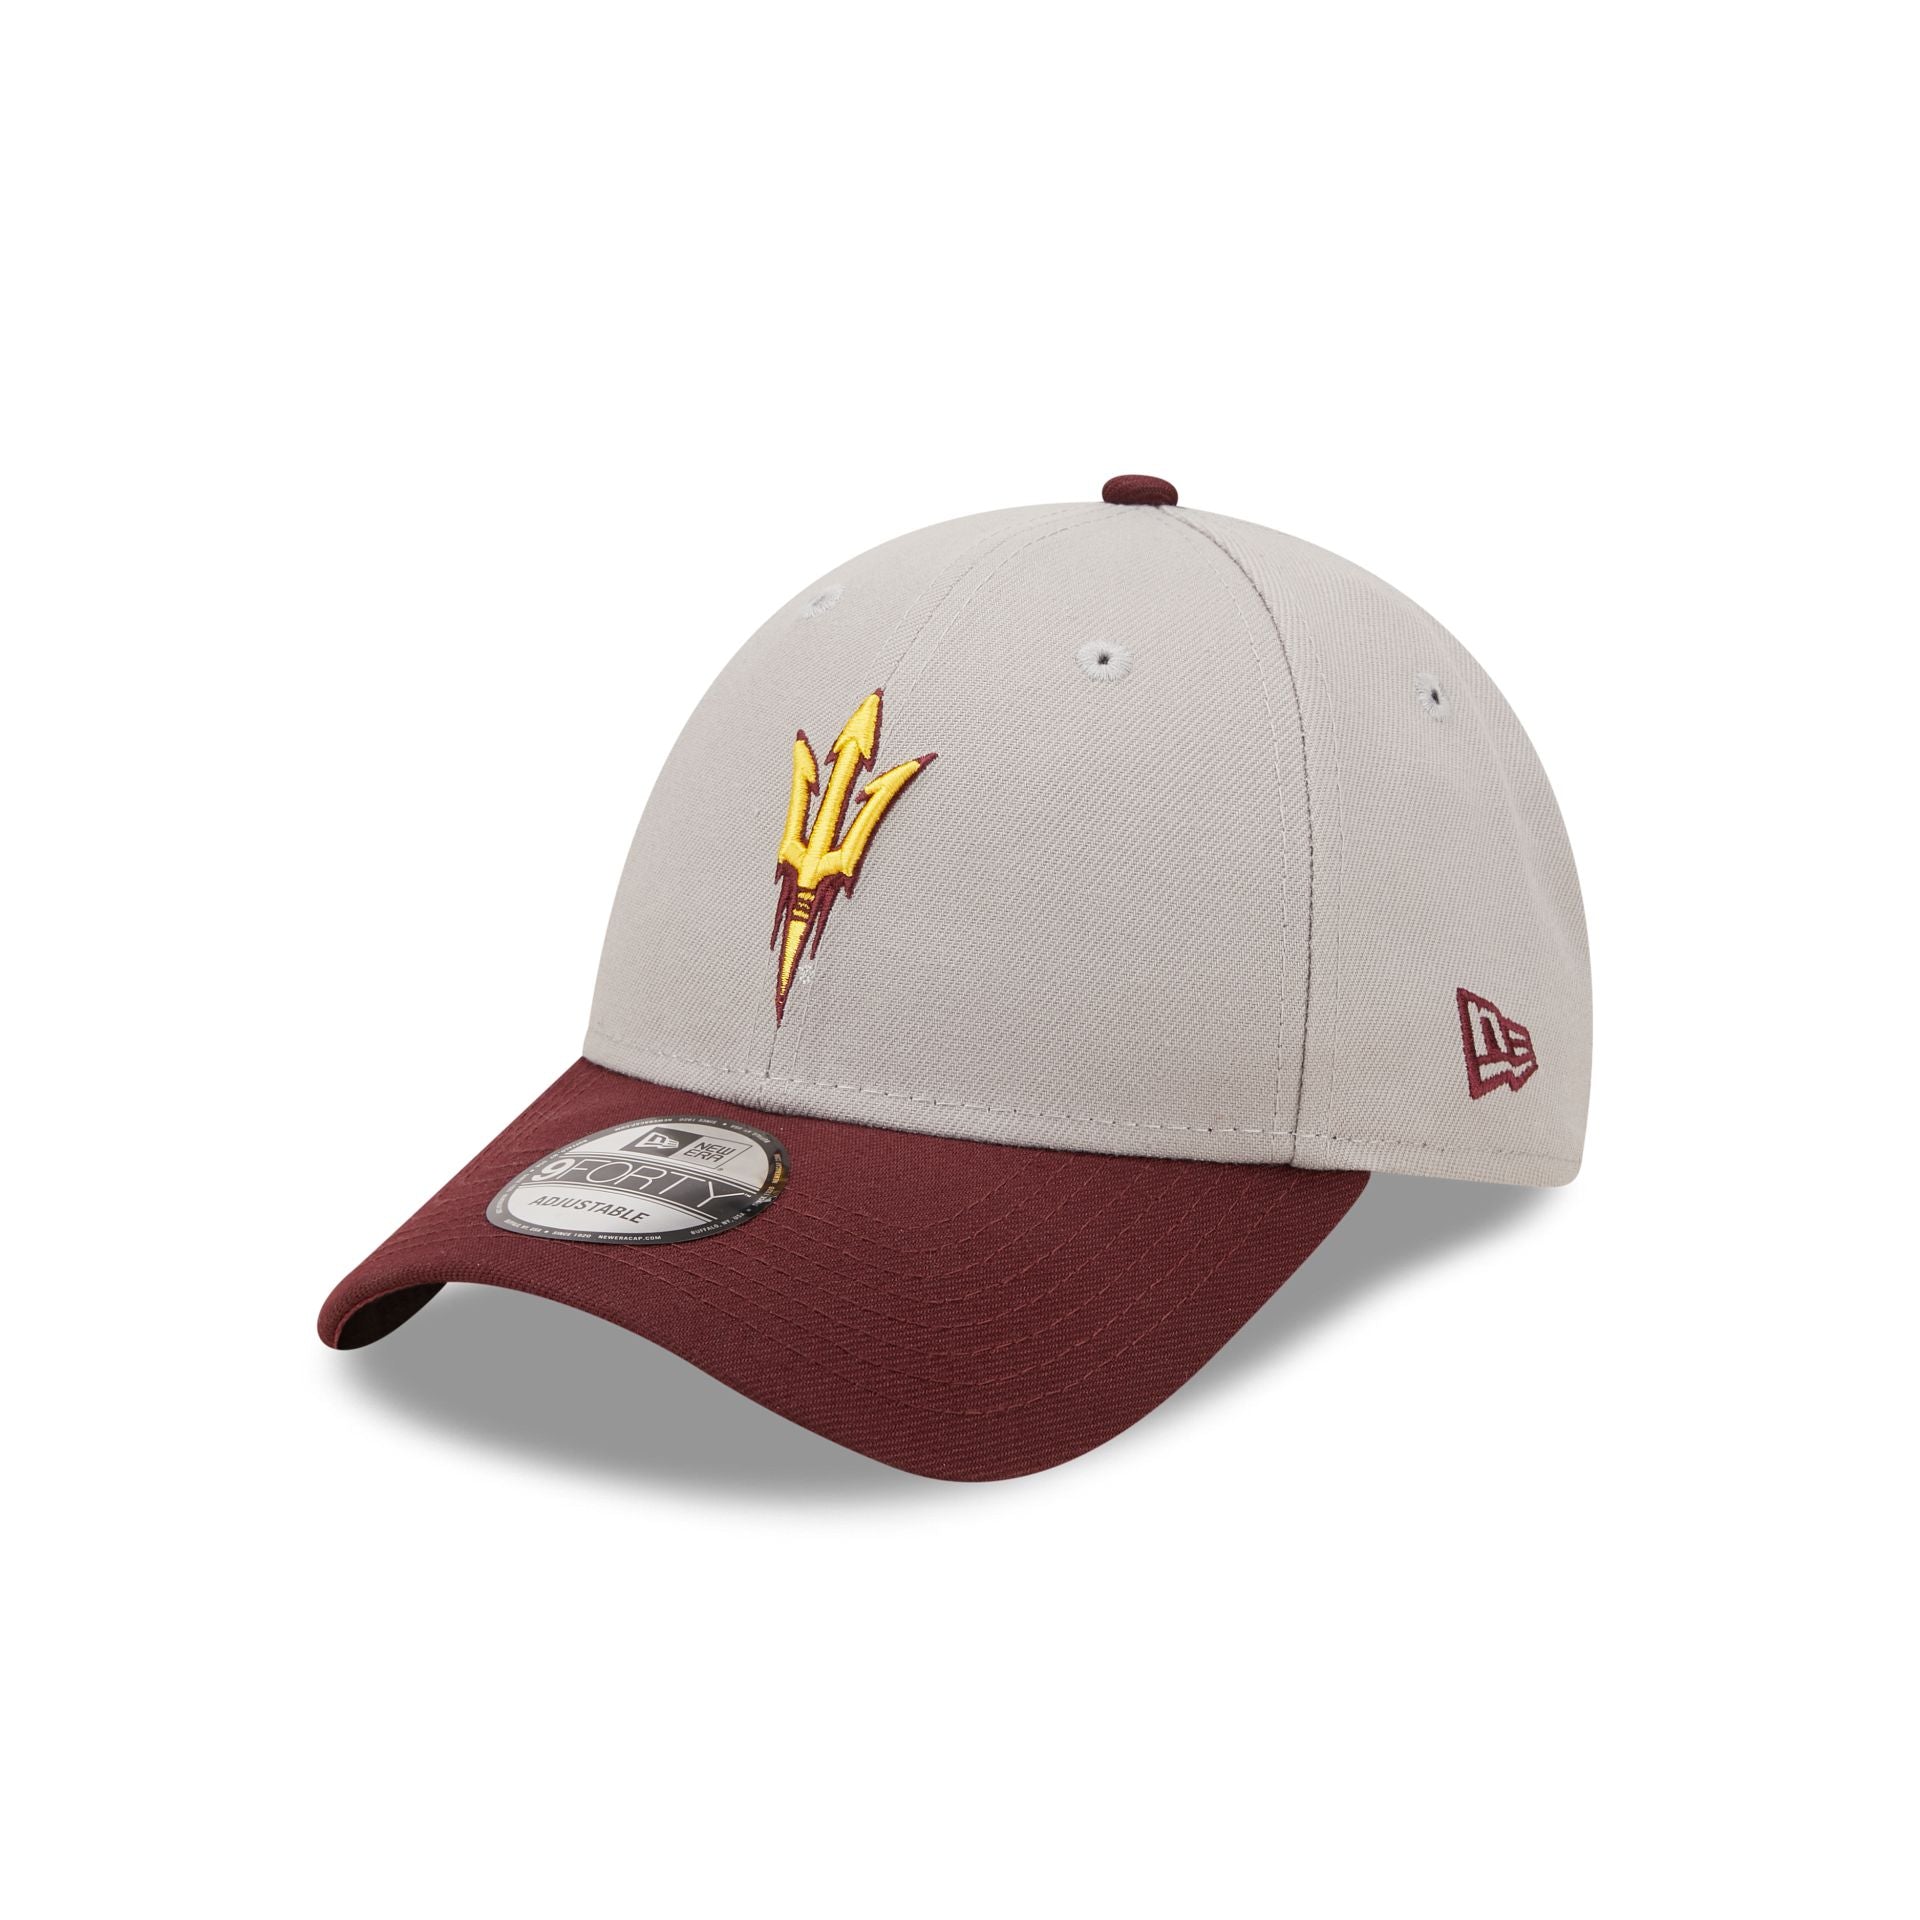 Arizona State Sun Devils 9FORTY Adjustable Hat, Gray, by New Era